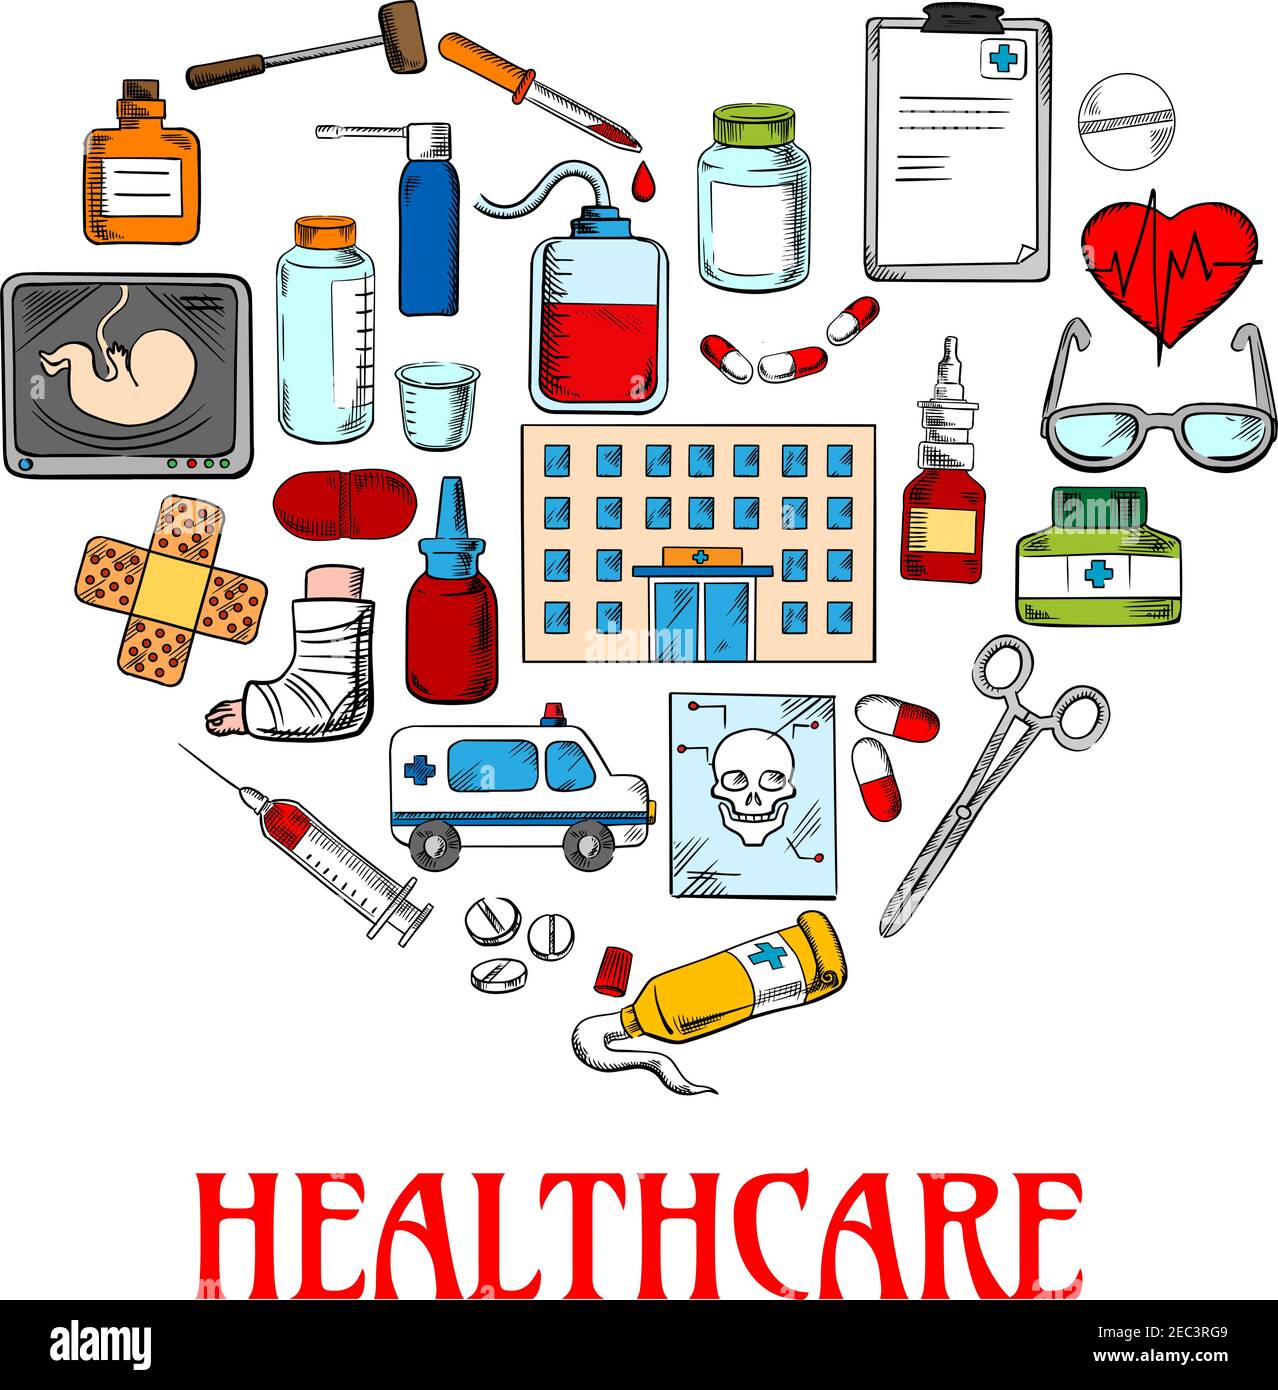 Colored sketch symbol of a heart made up of healthcare and medical icons such as medicine bottles and medical instruments, pills and syringes, blood b Stock Vector